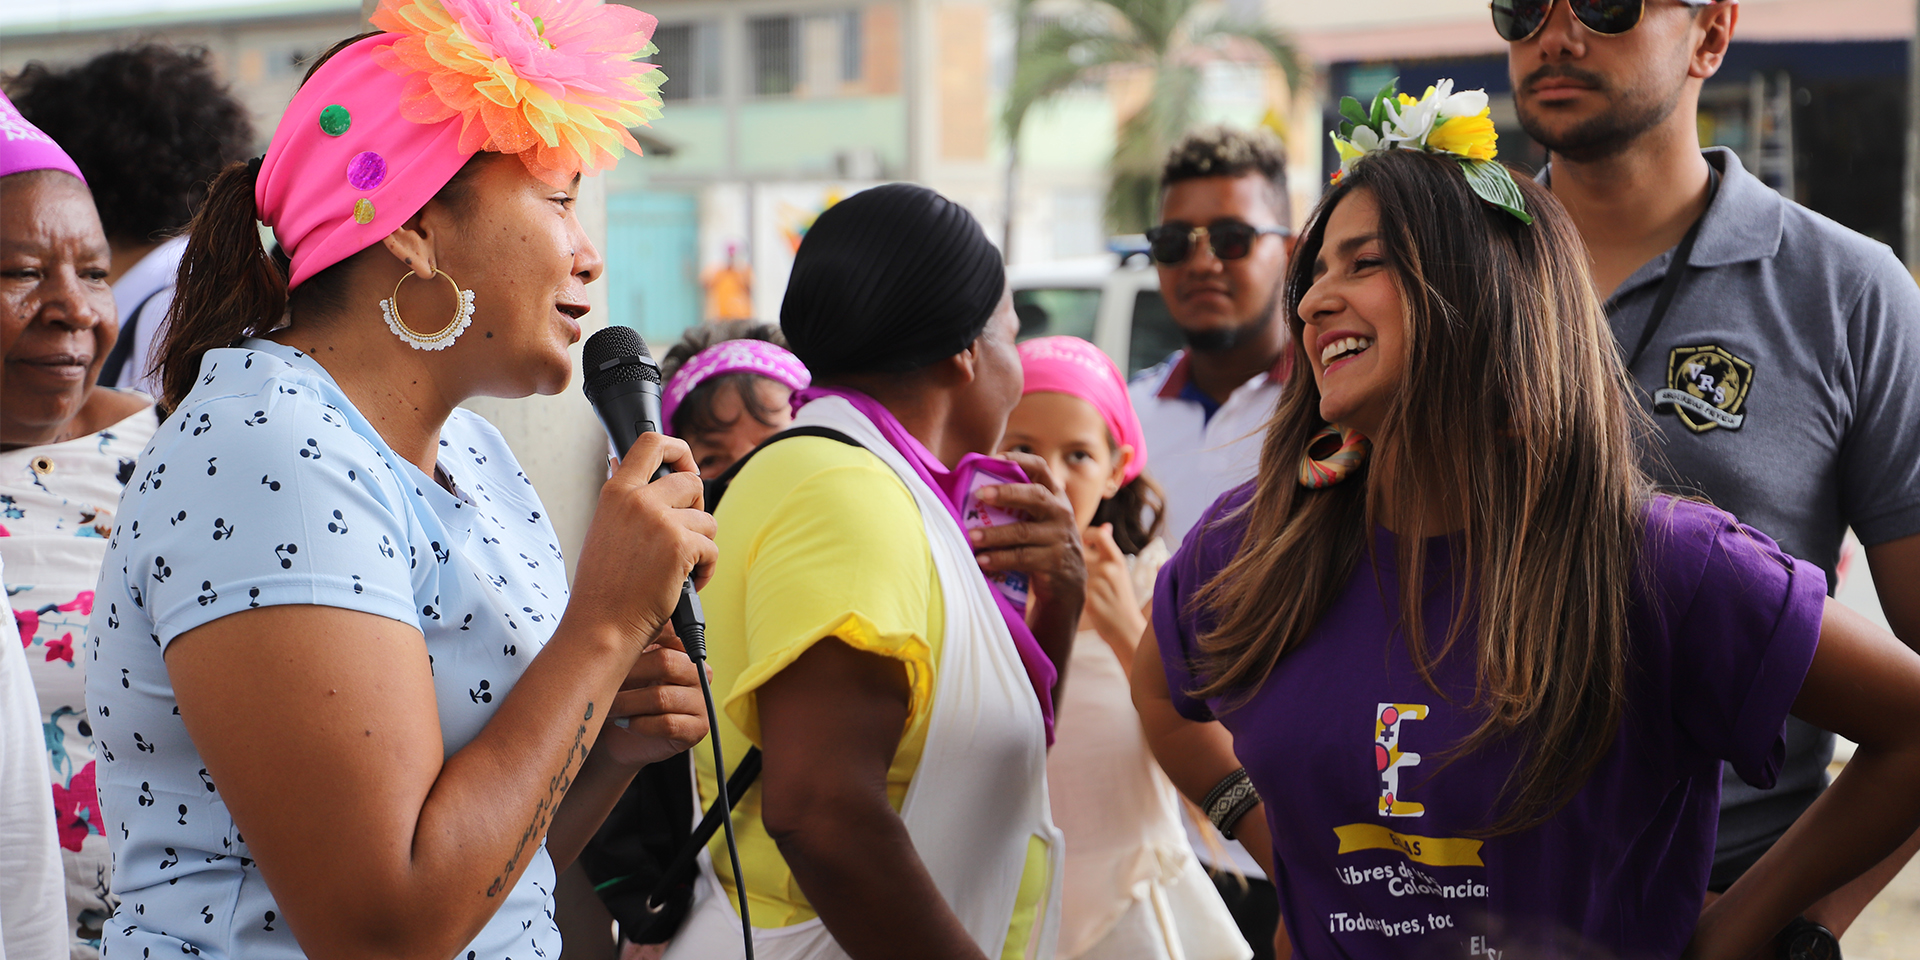 A group of several people gathered outside as a woman with a microphone interviews a smiling woman standing beside her.